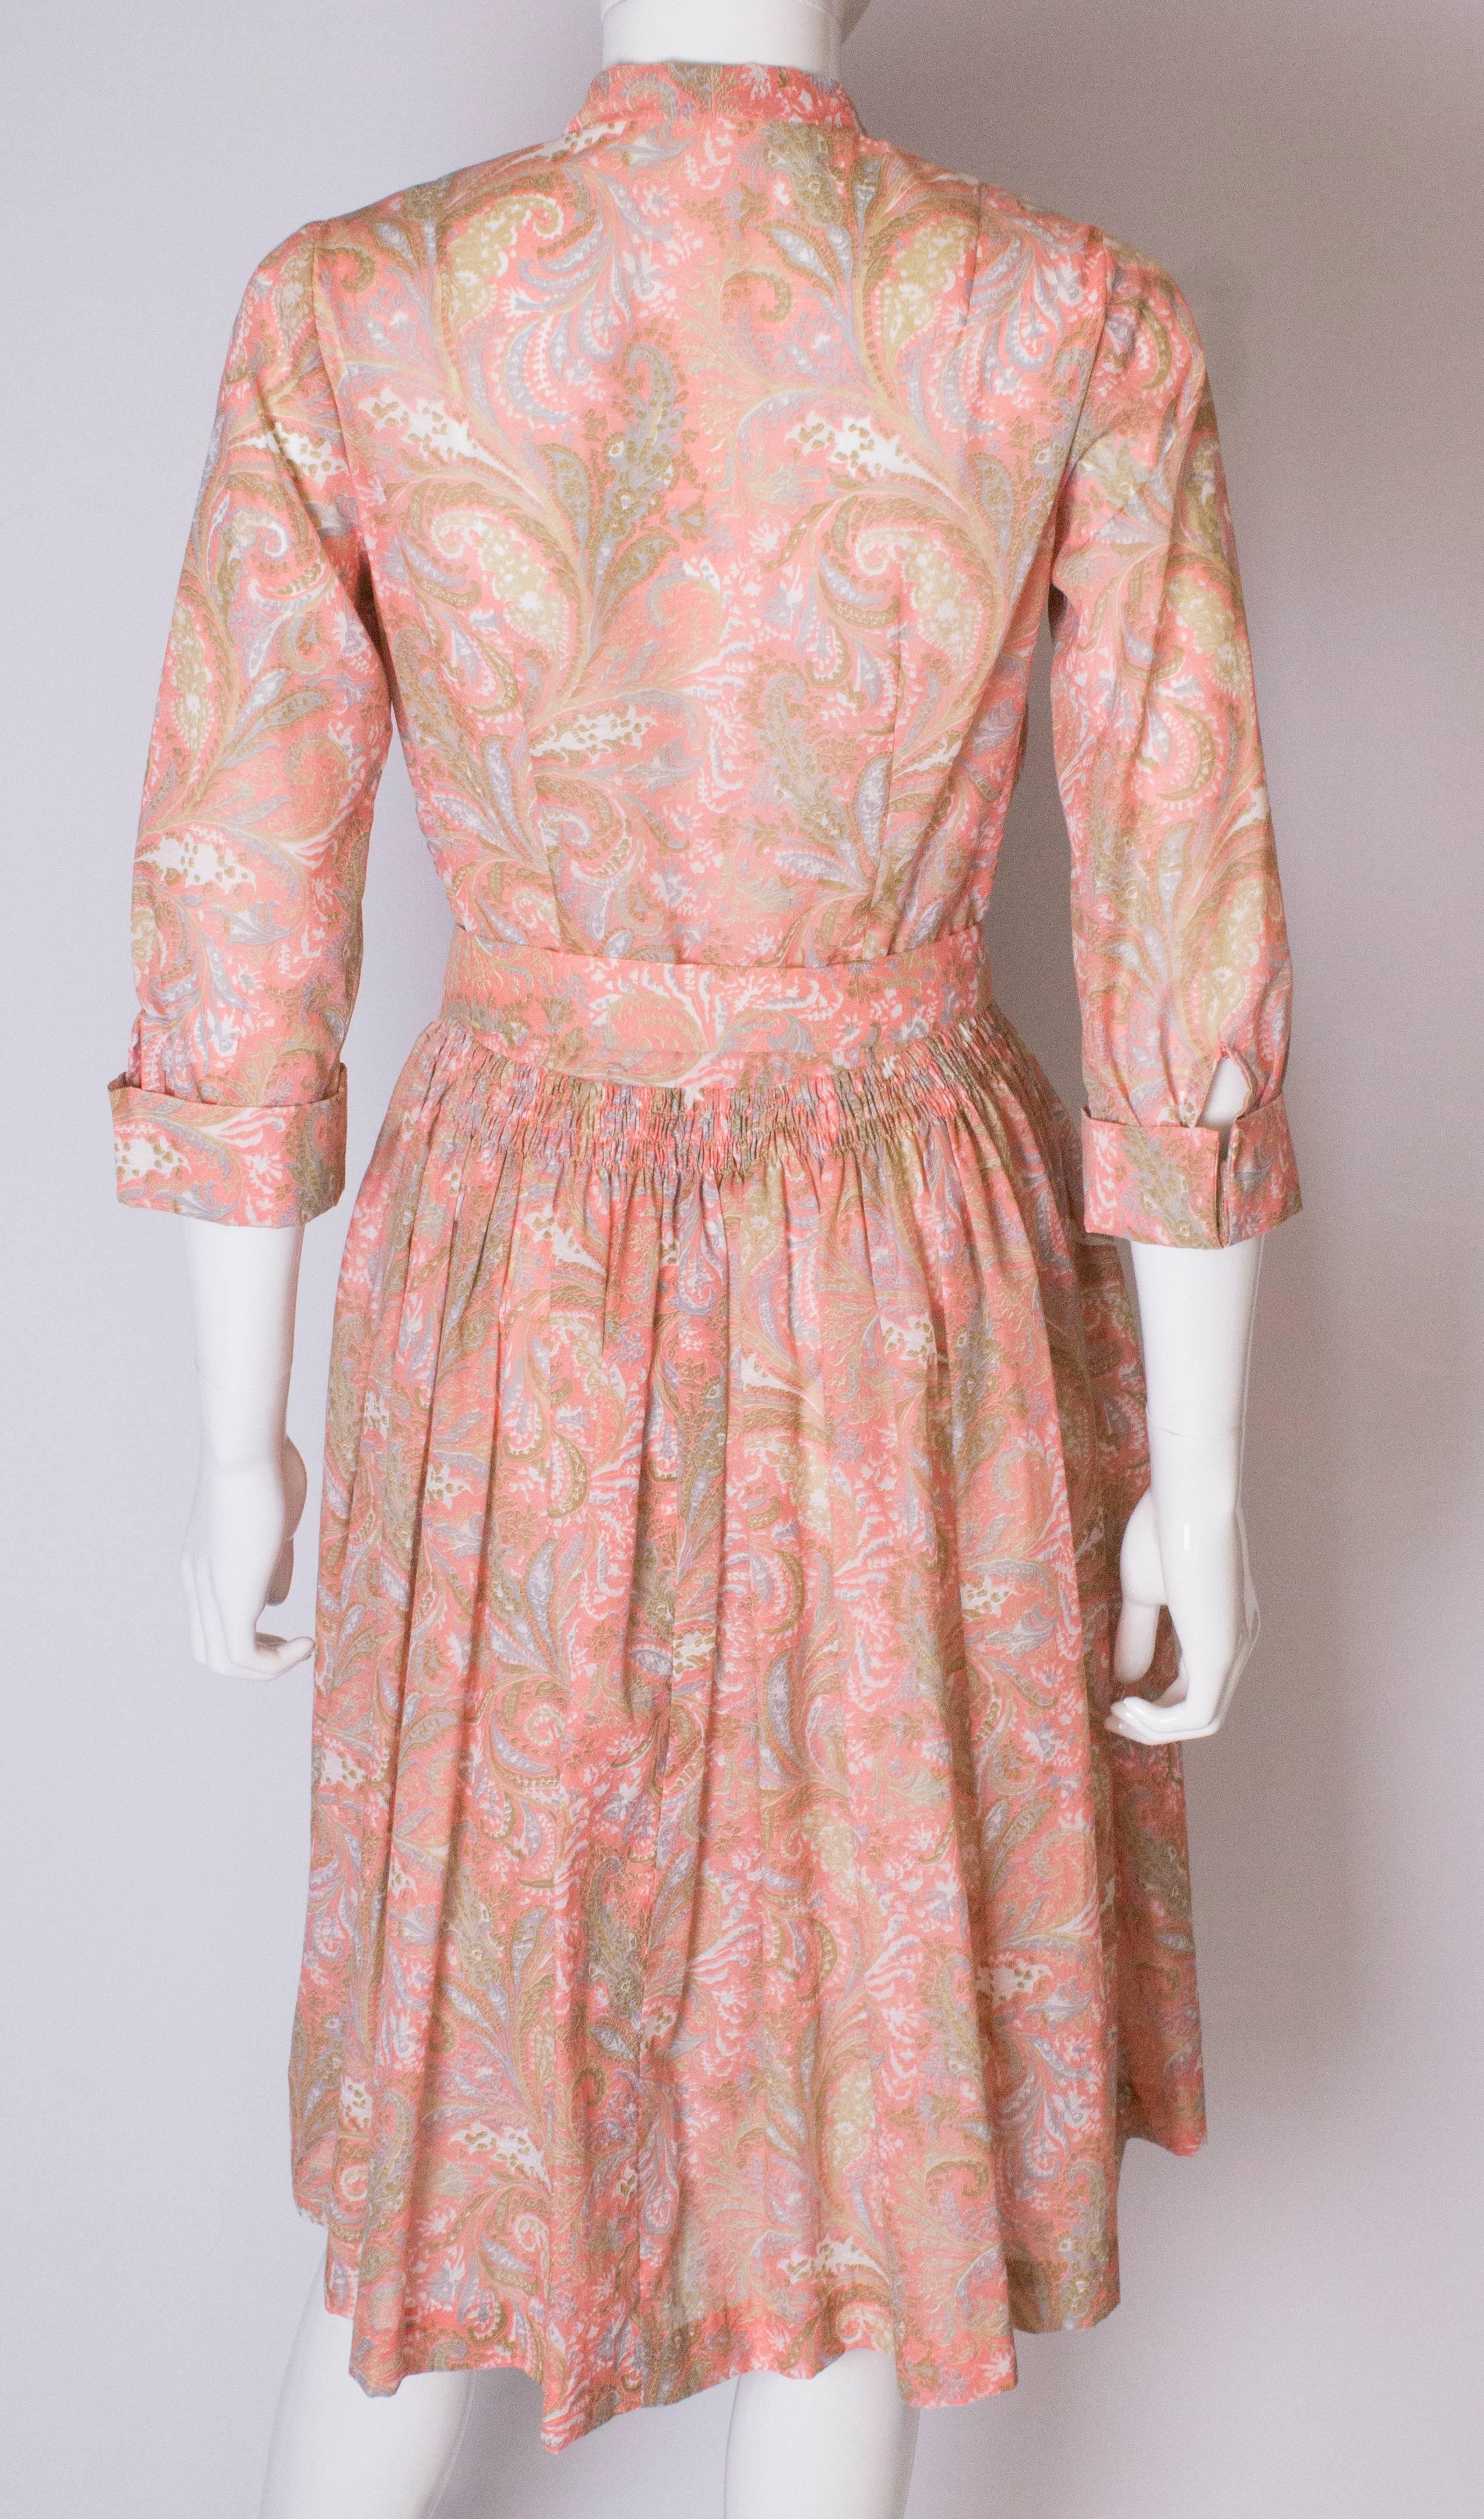 A vintage 1950s Pretty printed cotton day Dress with matching Decorative Belt 3